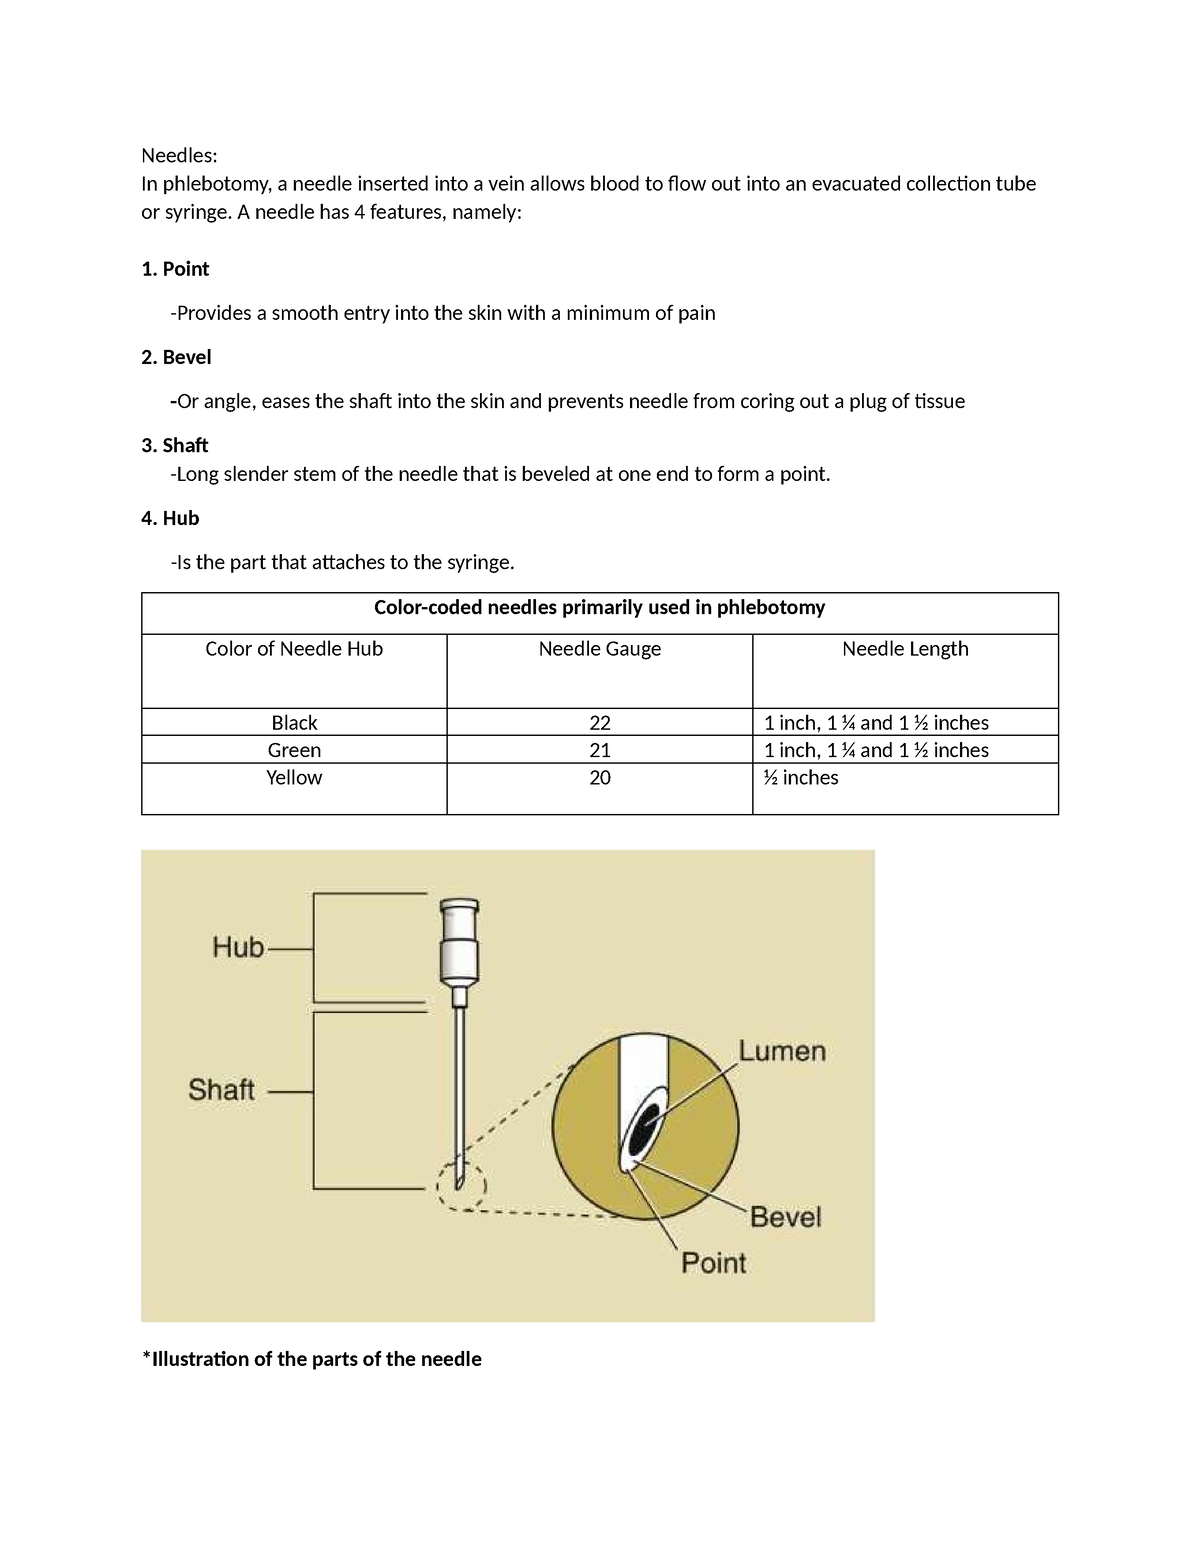 Clinical chemistry assignment - Needles: In phlebotomy, a needle ...